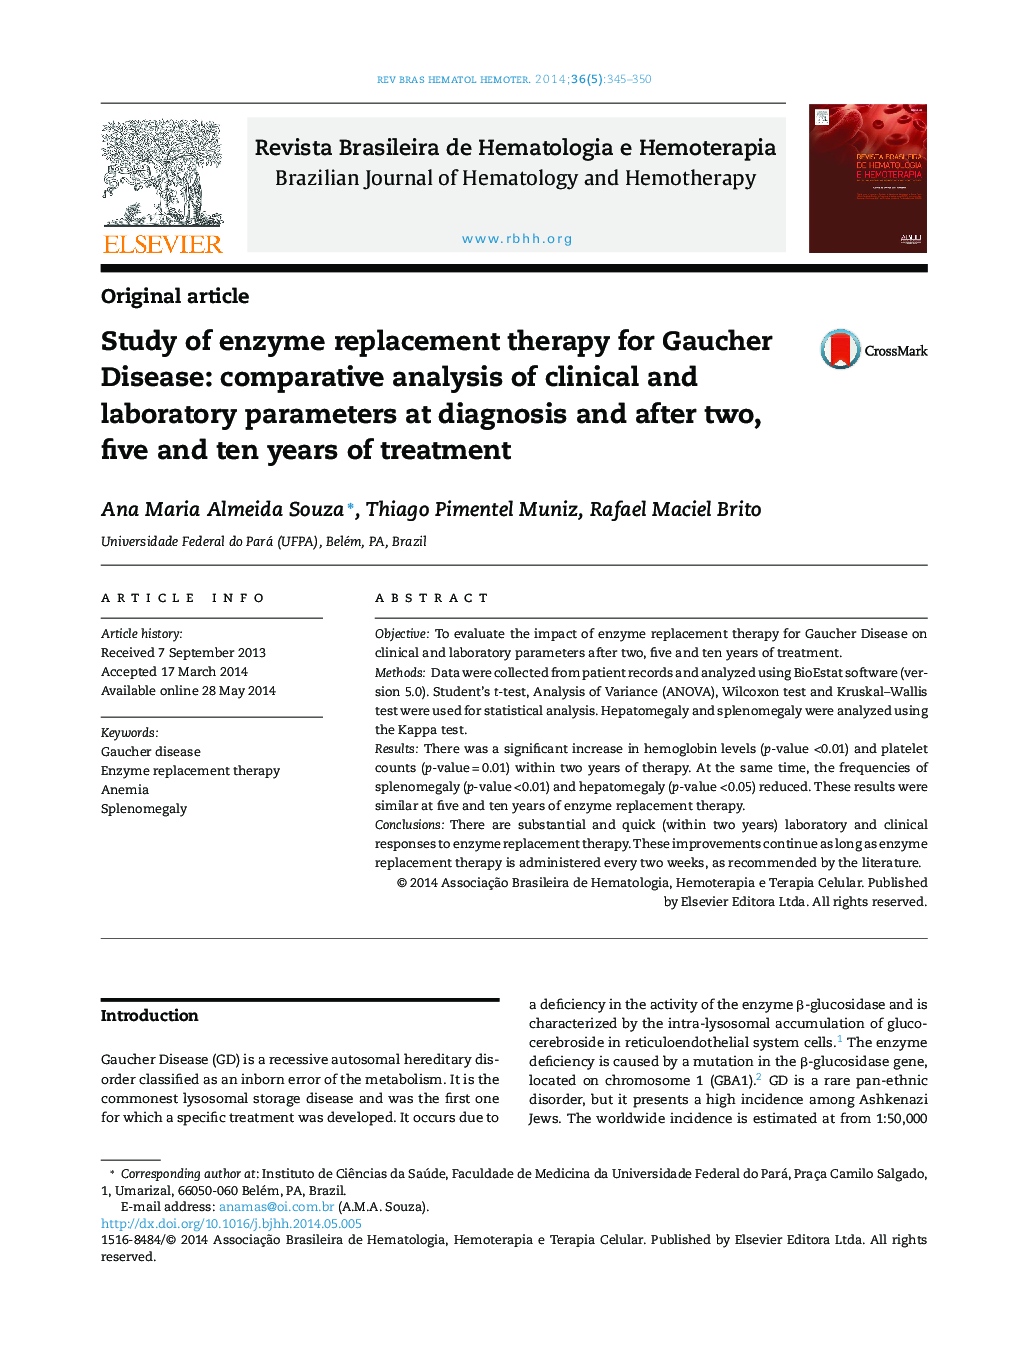 Study of enzyme replacement therapy for Gaucher Disease: comparative analysis of clinical and laboratory parameters at diagnosis and after two, five and ten years of treatment